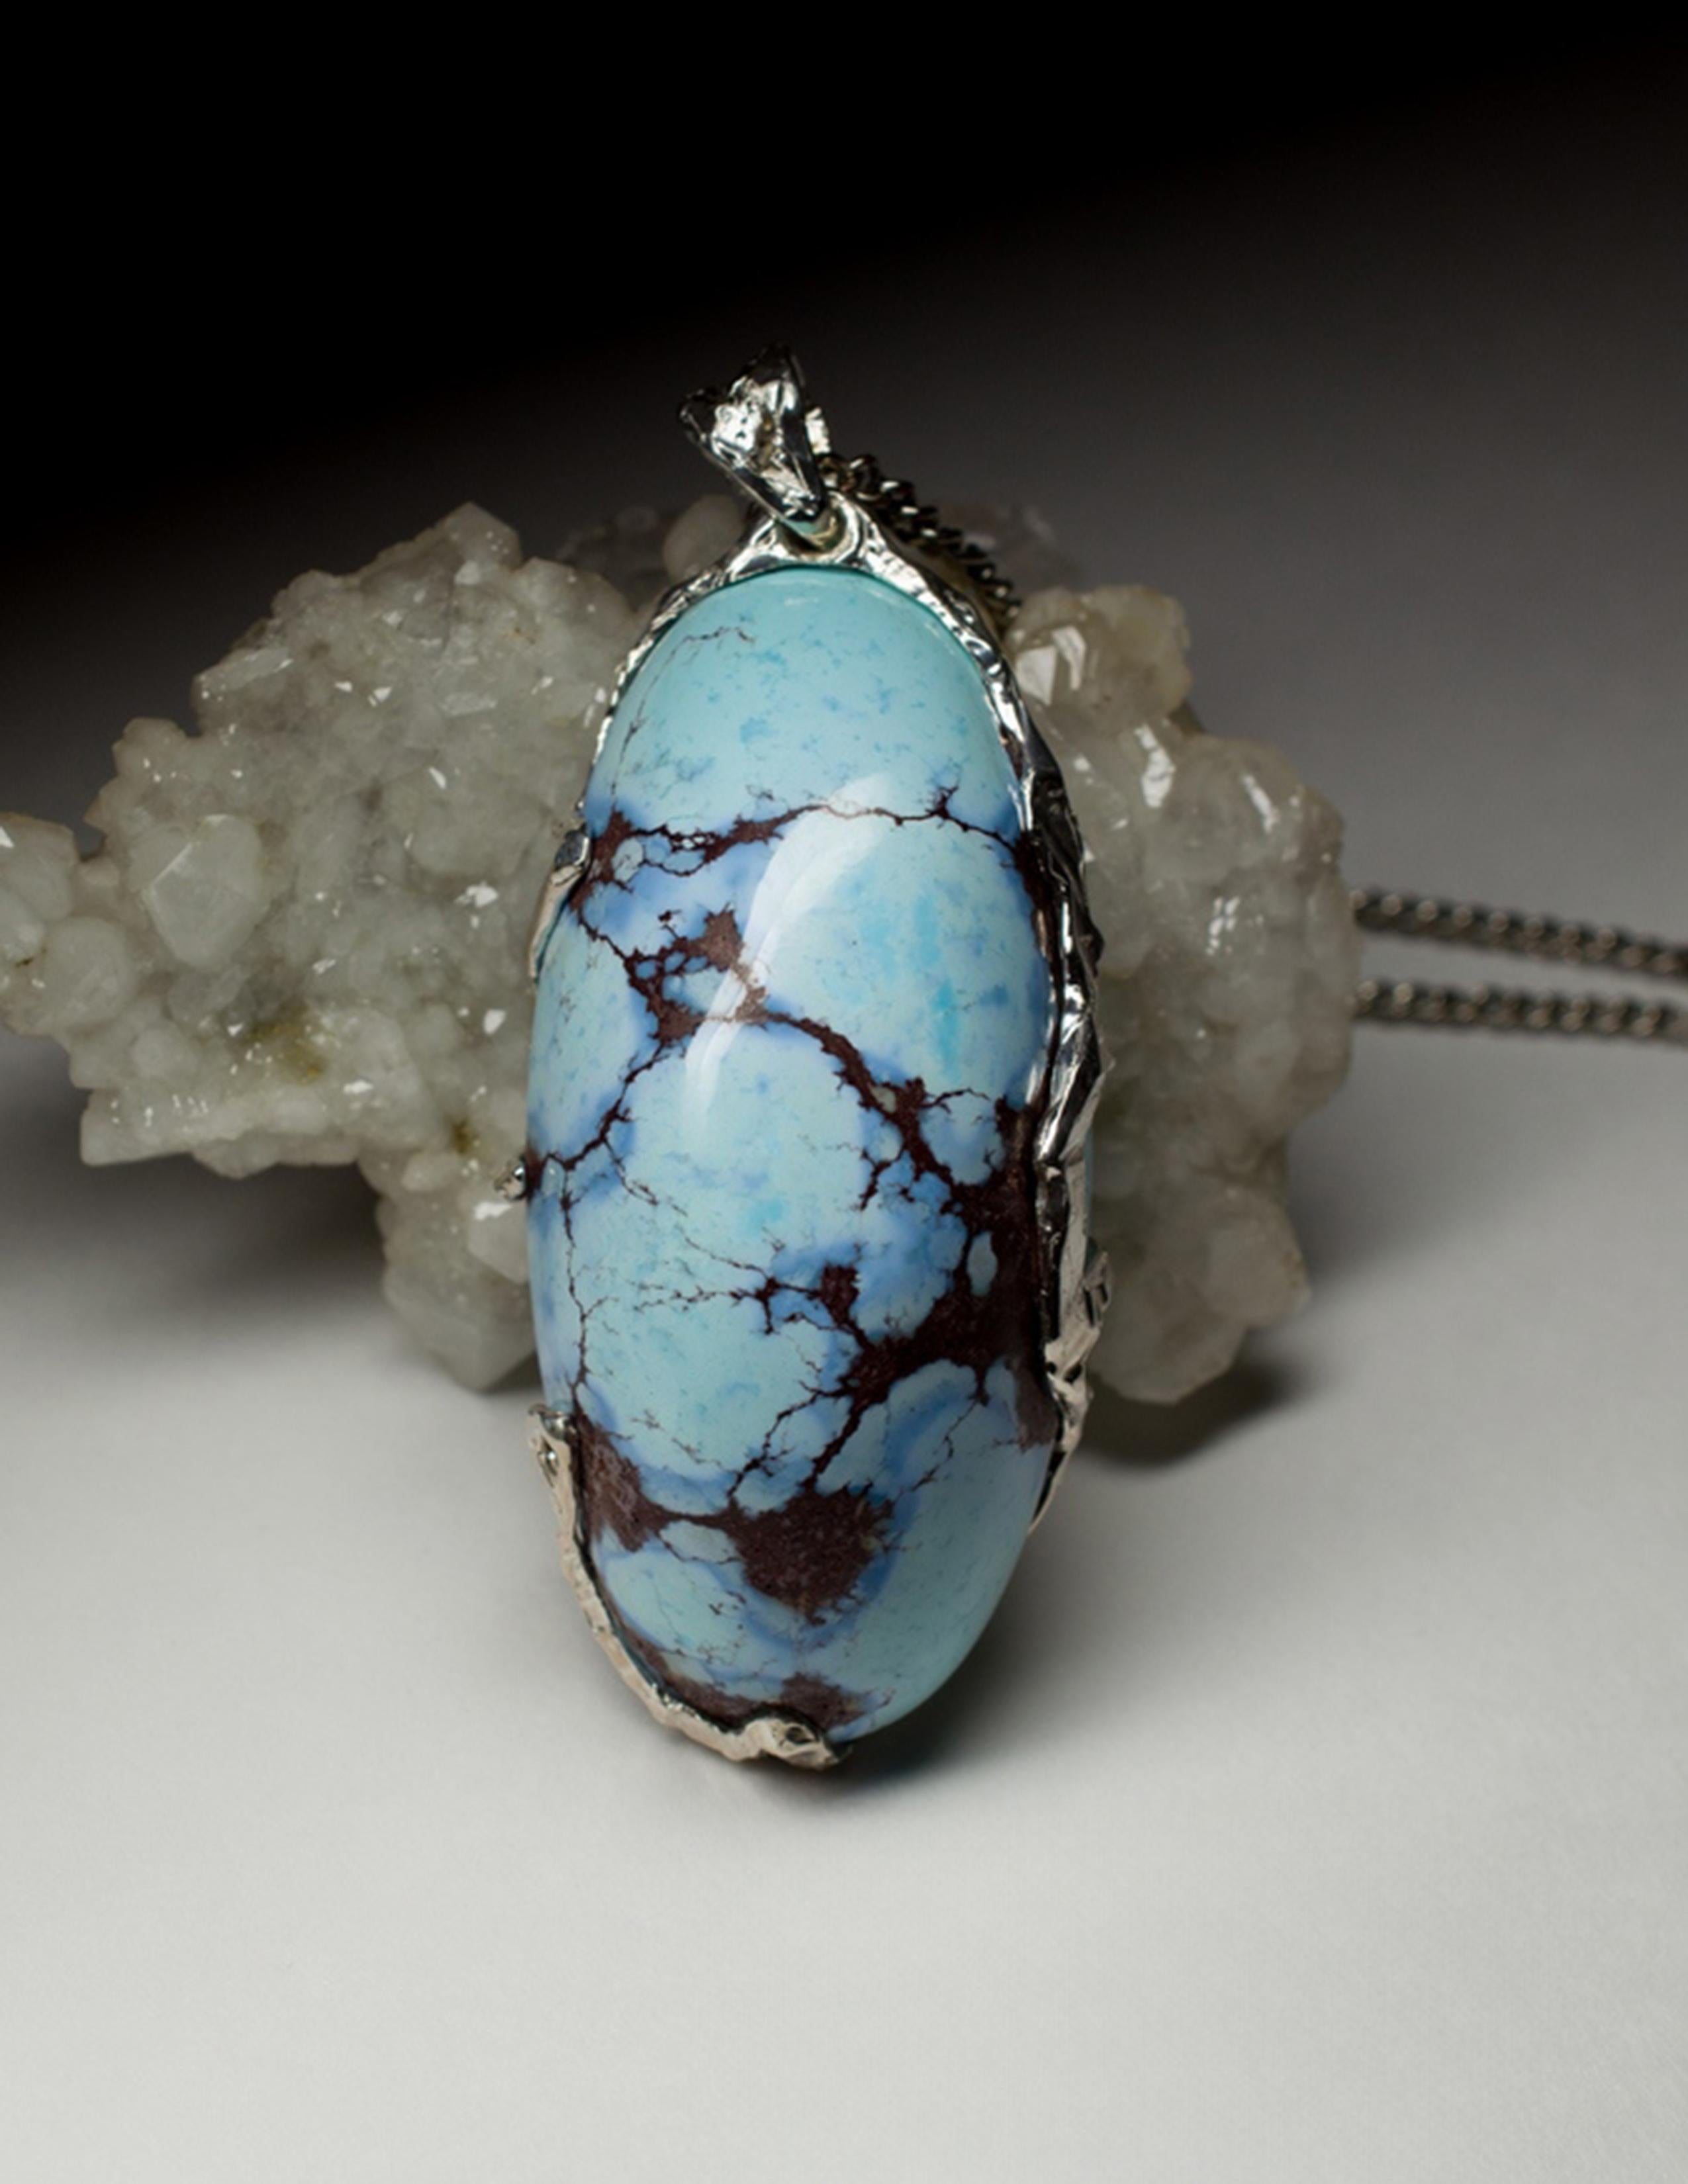 Large silver pendant with natural fine quality Turquoise Cabochon
turquoise origin - Kazakhstan
turquoise weight - 105.70 carats
pendant weight - 27.16 grams
pendant height - 2.4 in / 61 mm
stone measurements - 0.59 x 0.94 x 1.97 in / 15 х 24 х 50